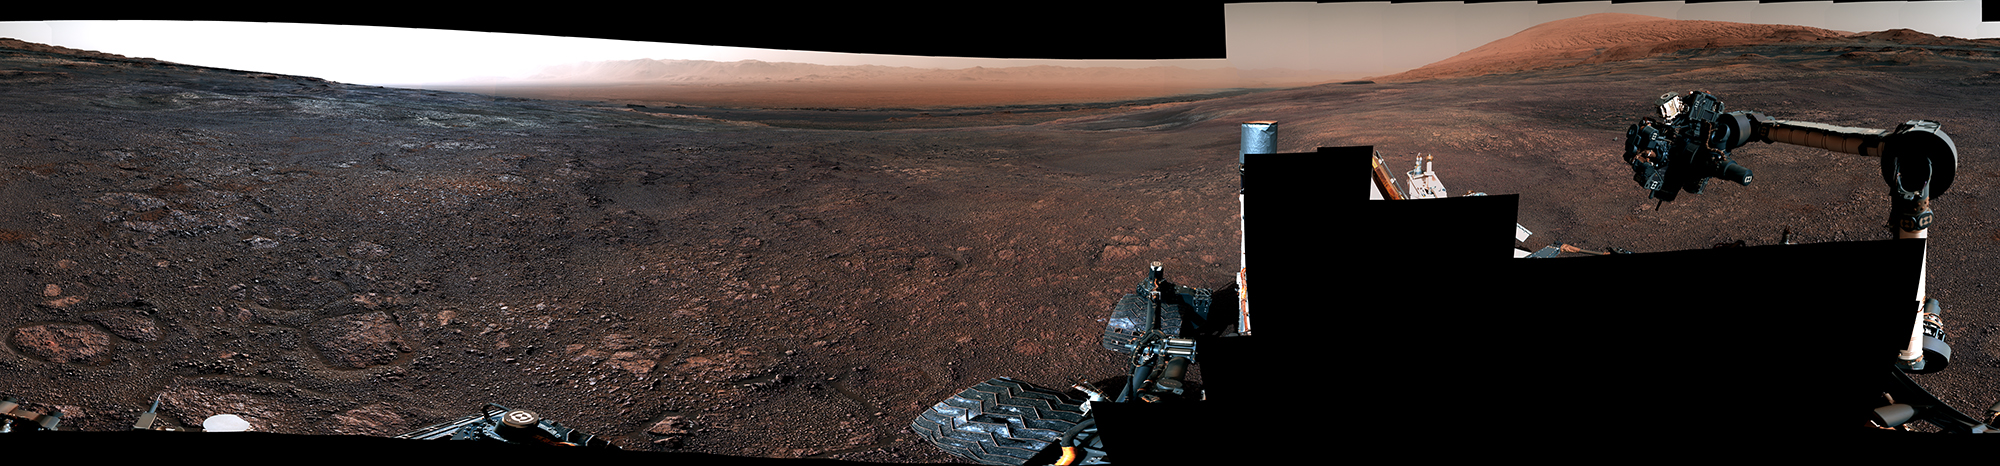 This panorama from the Mast Camera (Mastcam) on NASA's Curiosity Mars rover was taken on Dec. 19 (Sol 2265). The rover's last drill location on Vera Rubin Ridge is visible, as well as the clay region it will spend the next year exploring.